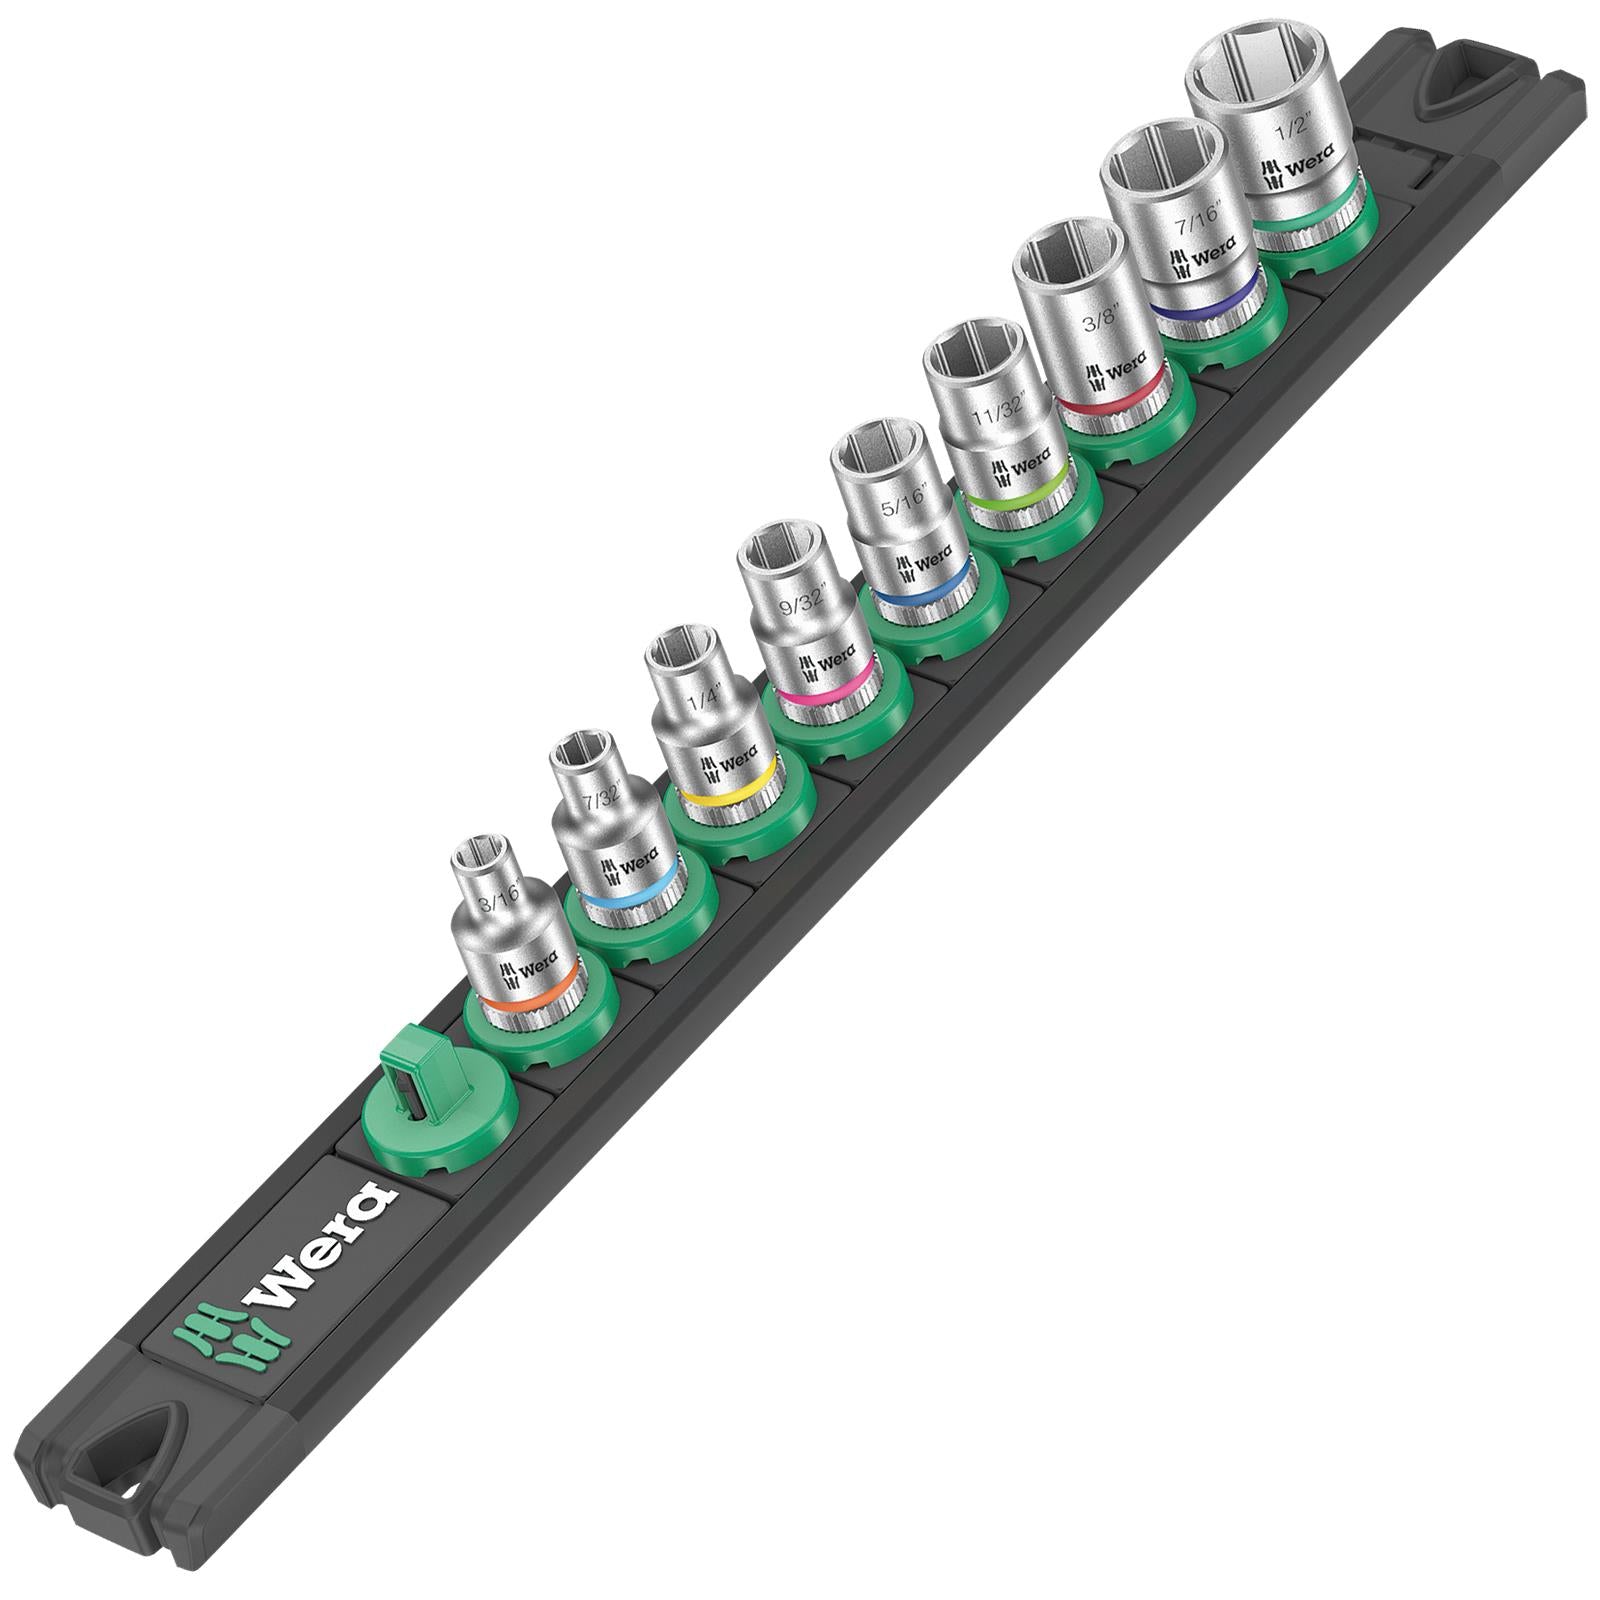 Wera Socket Set 1/4" Drive on Magnetic Socket Rail A Imperial 1 Zyklop 9 Pieces 3/16" to 1/2